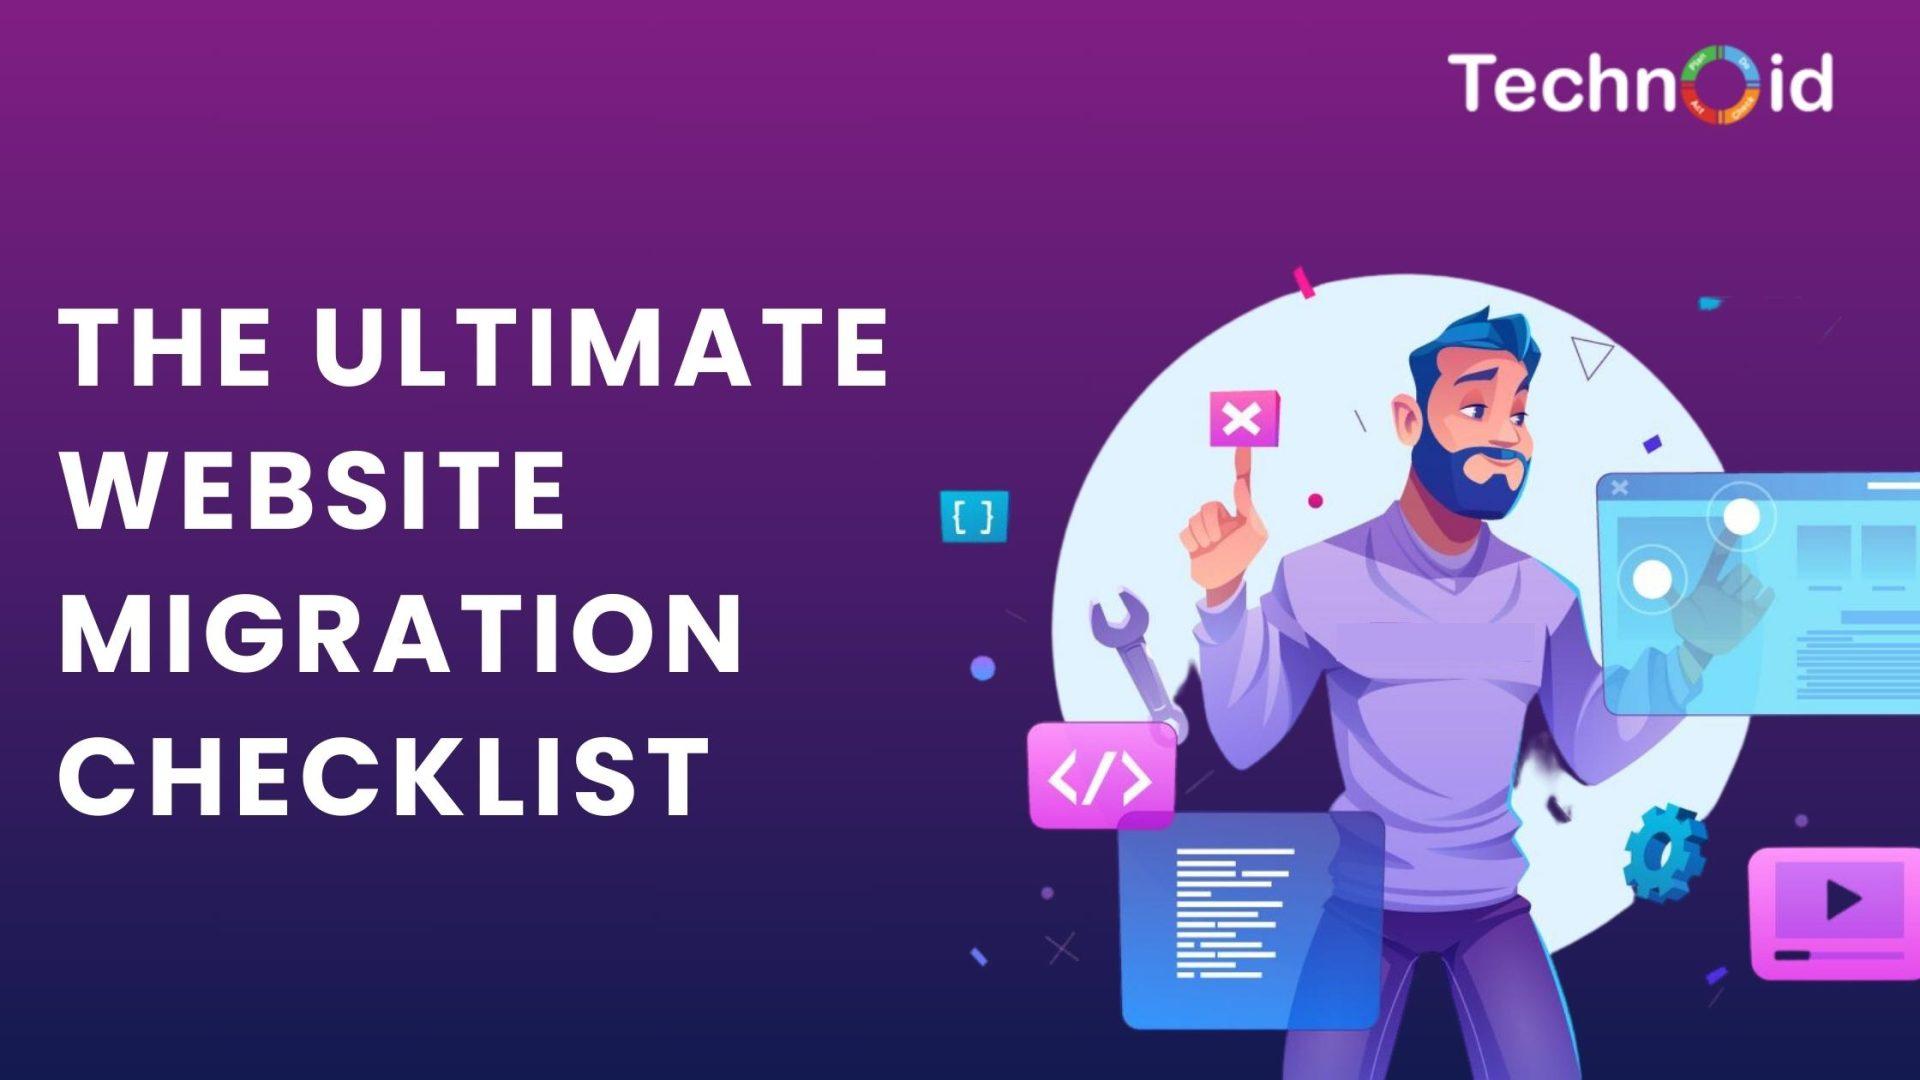 Website migration checklist by Technoid FZE